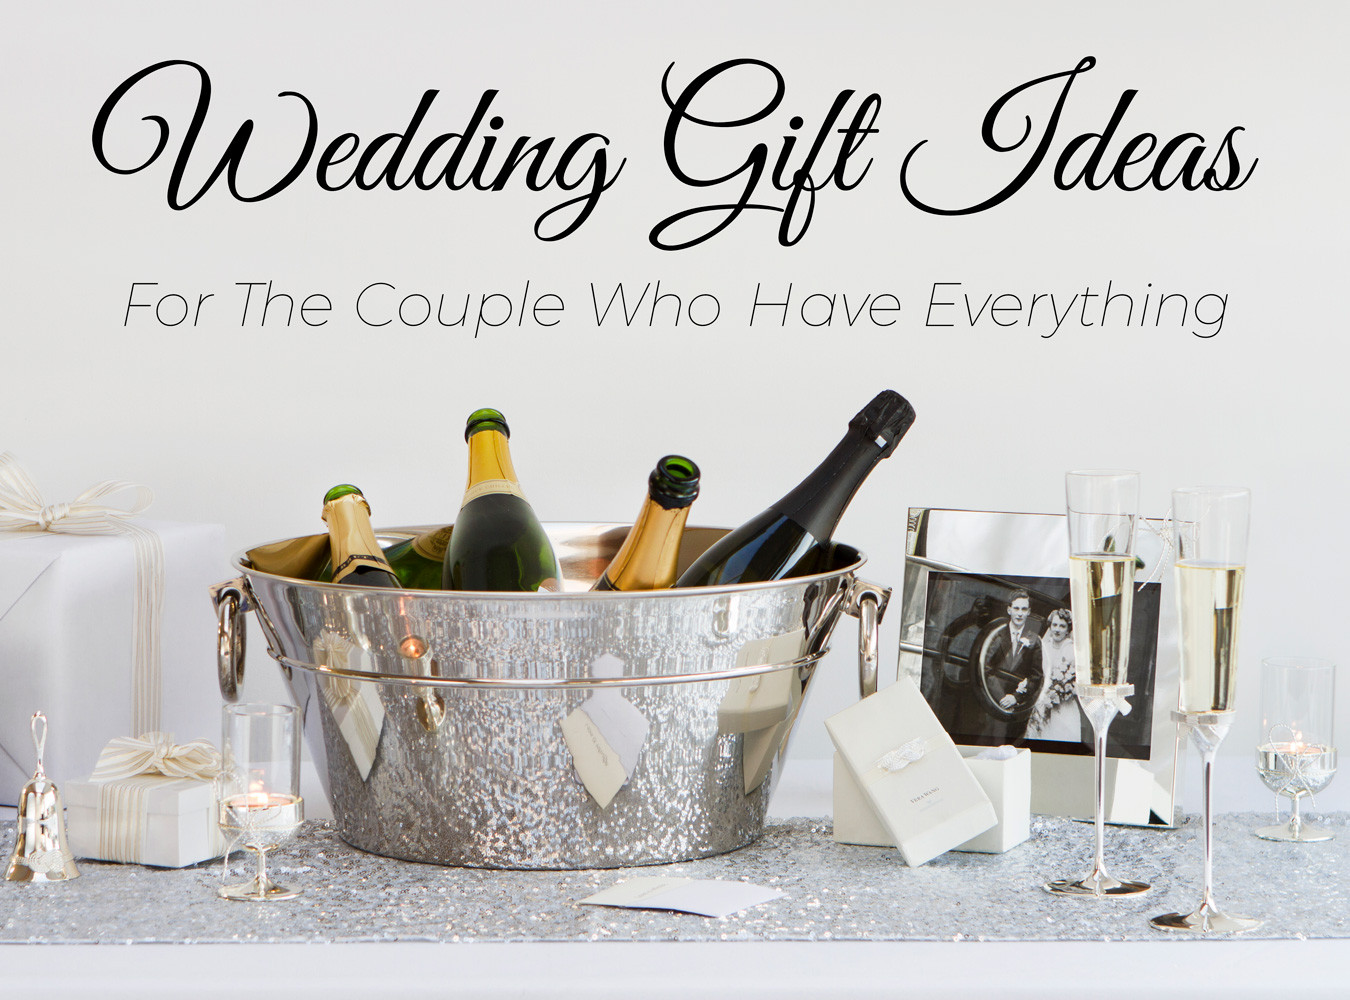 Wedding Gift Ideas For Couple That Has Everything
 5 Wedding Gift Ideas for the Couple Who Have Everything